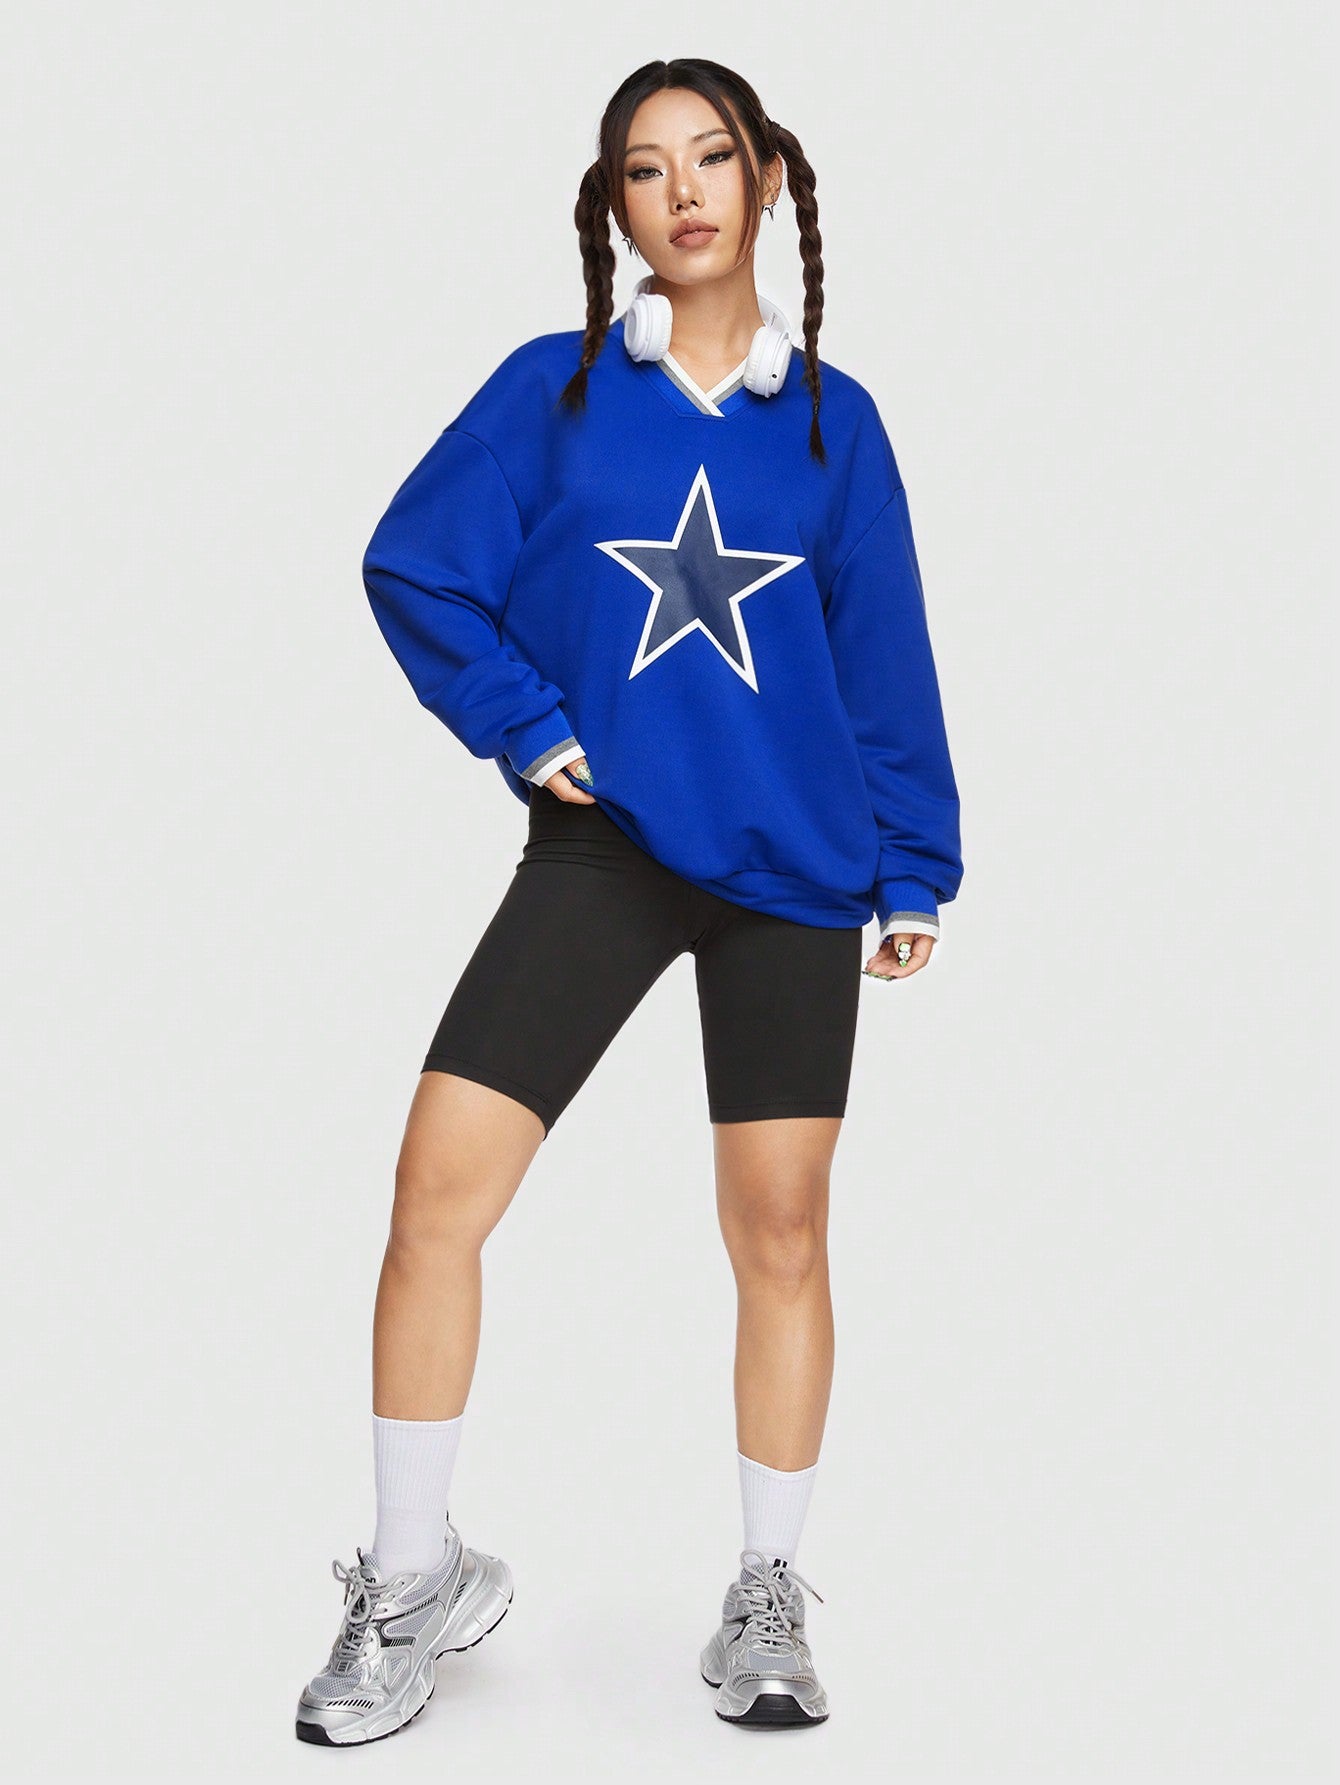 Women's Loose Fit Sweatshirt With Contrast Color And Pentagram Print On Collar And Cuffs